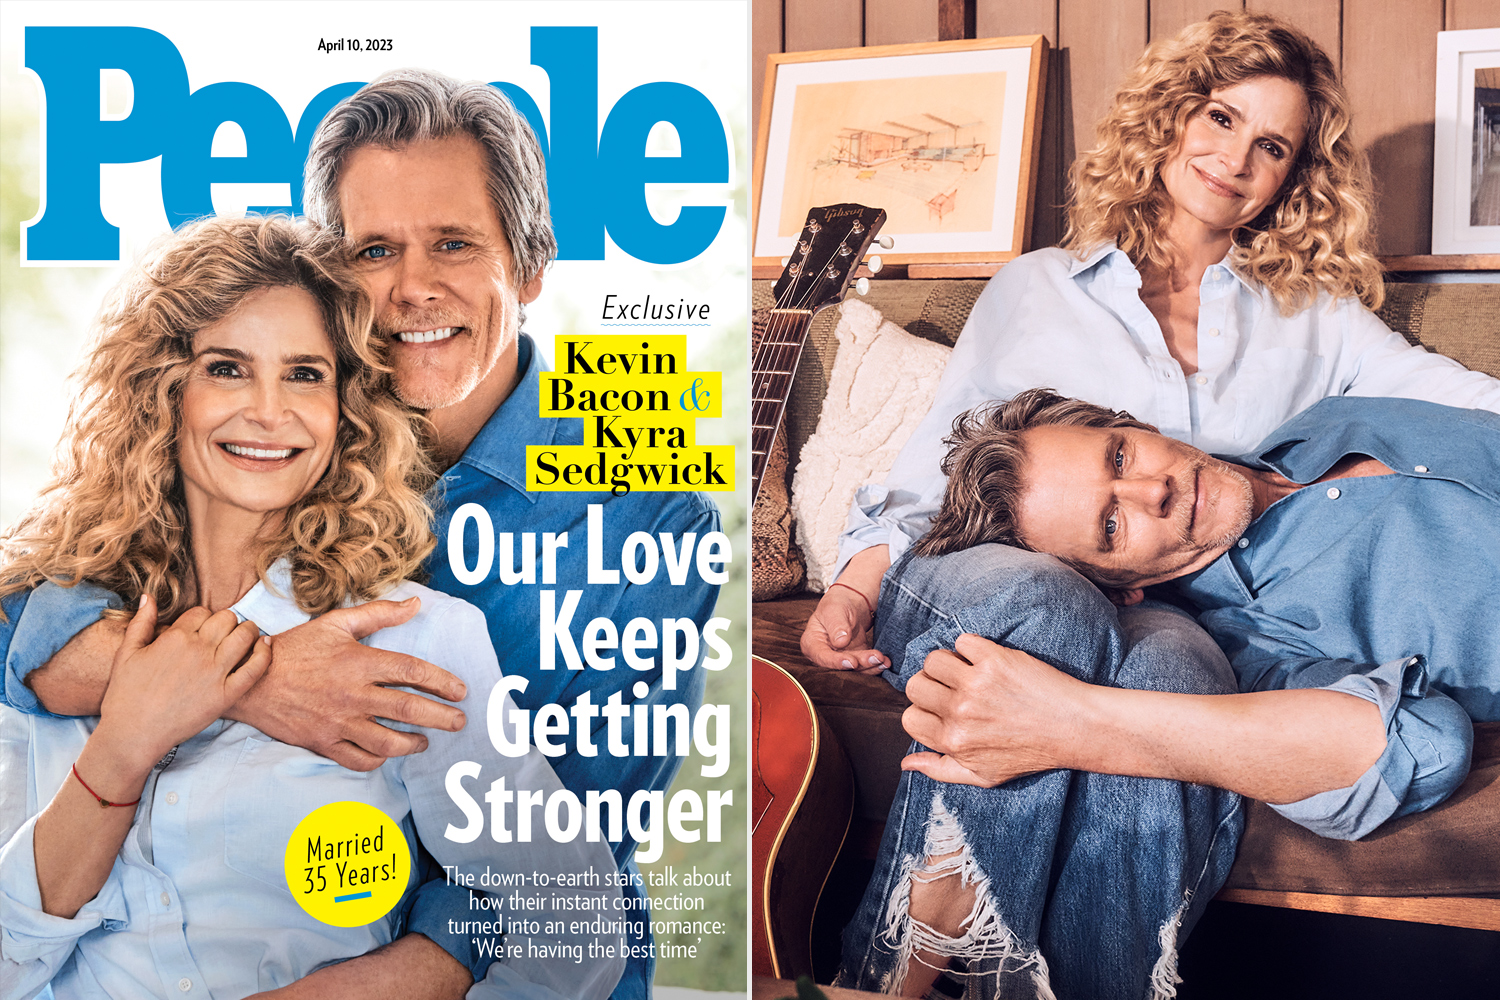 Kyra Sedgwick and Kevin Bacon Rollout 4/10